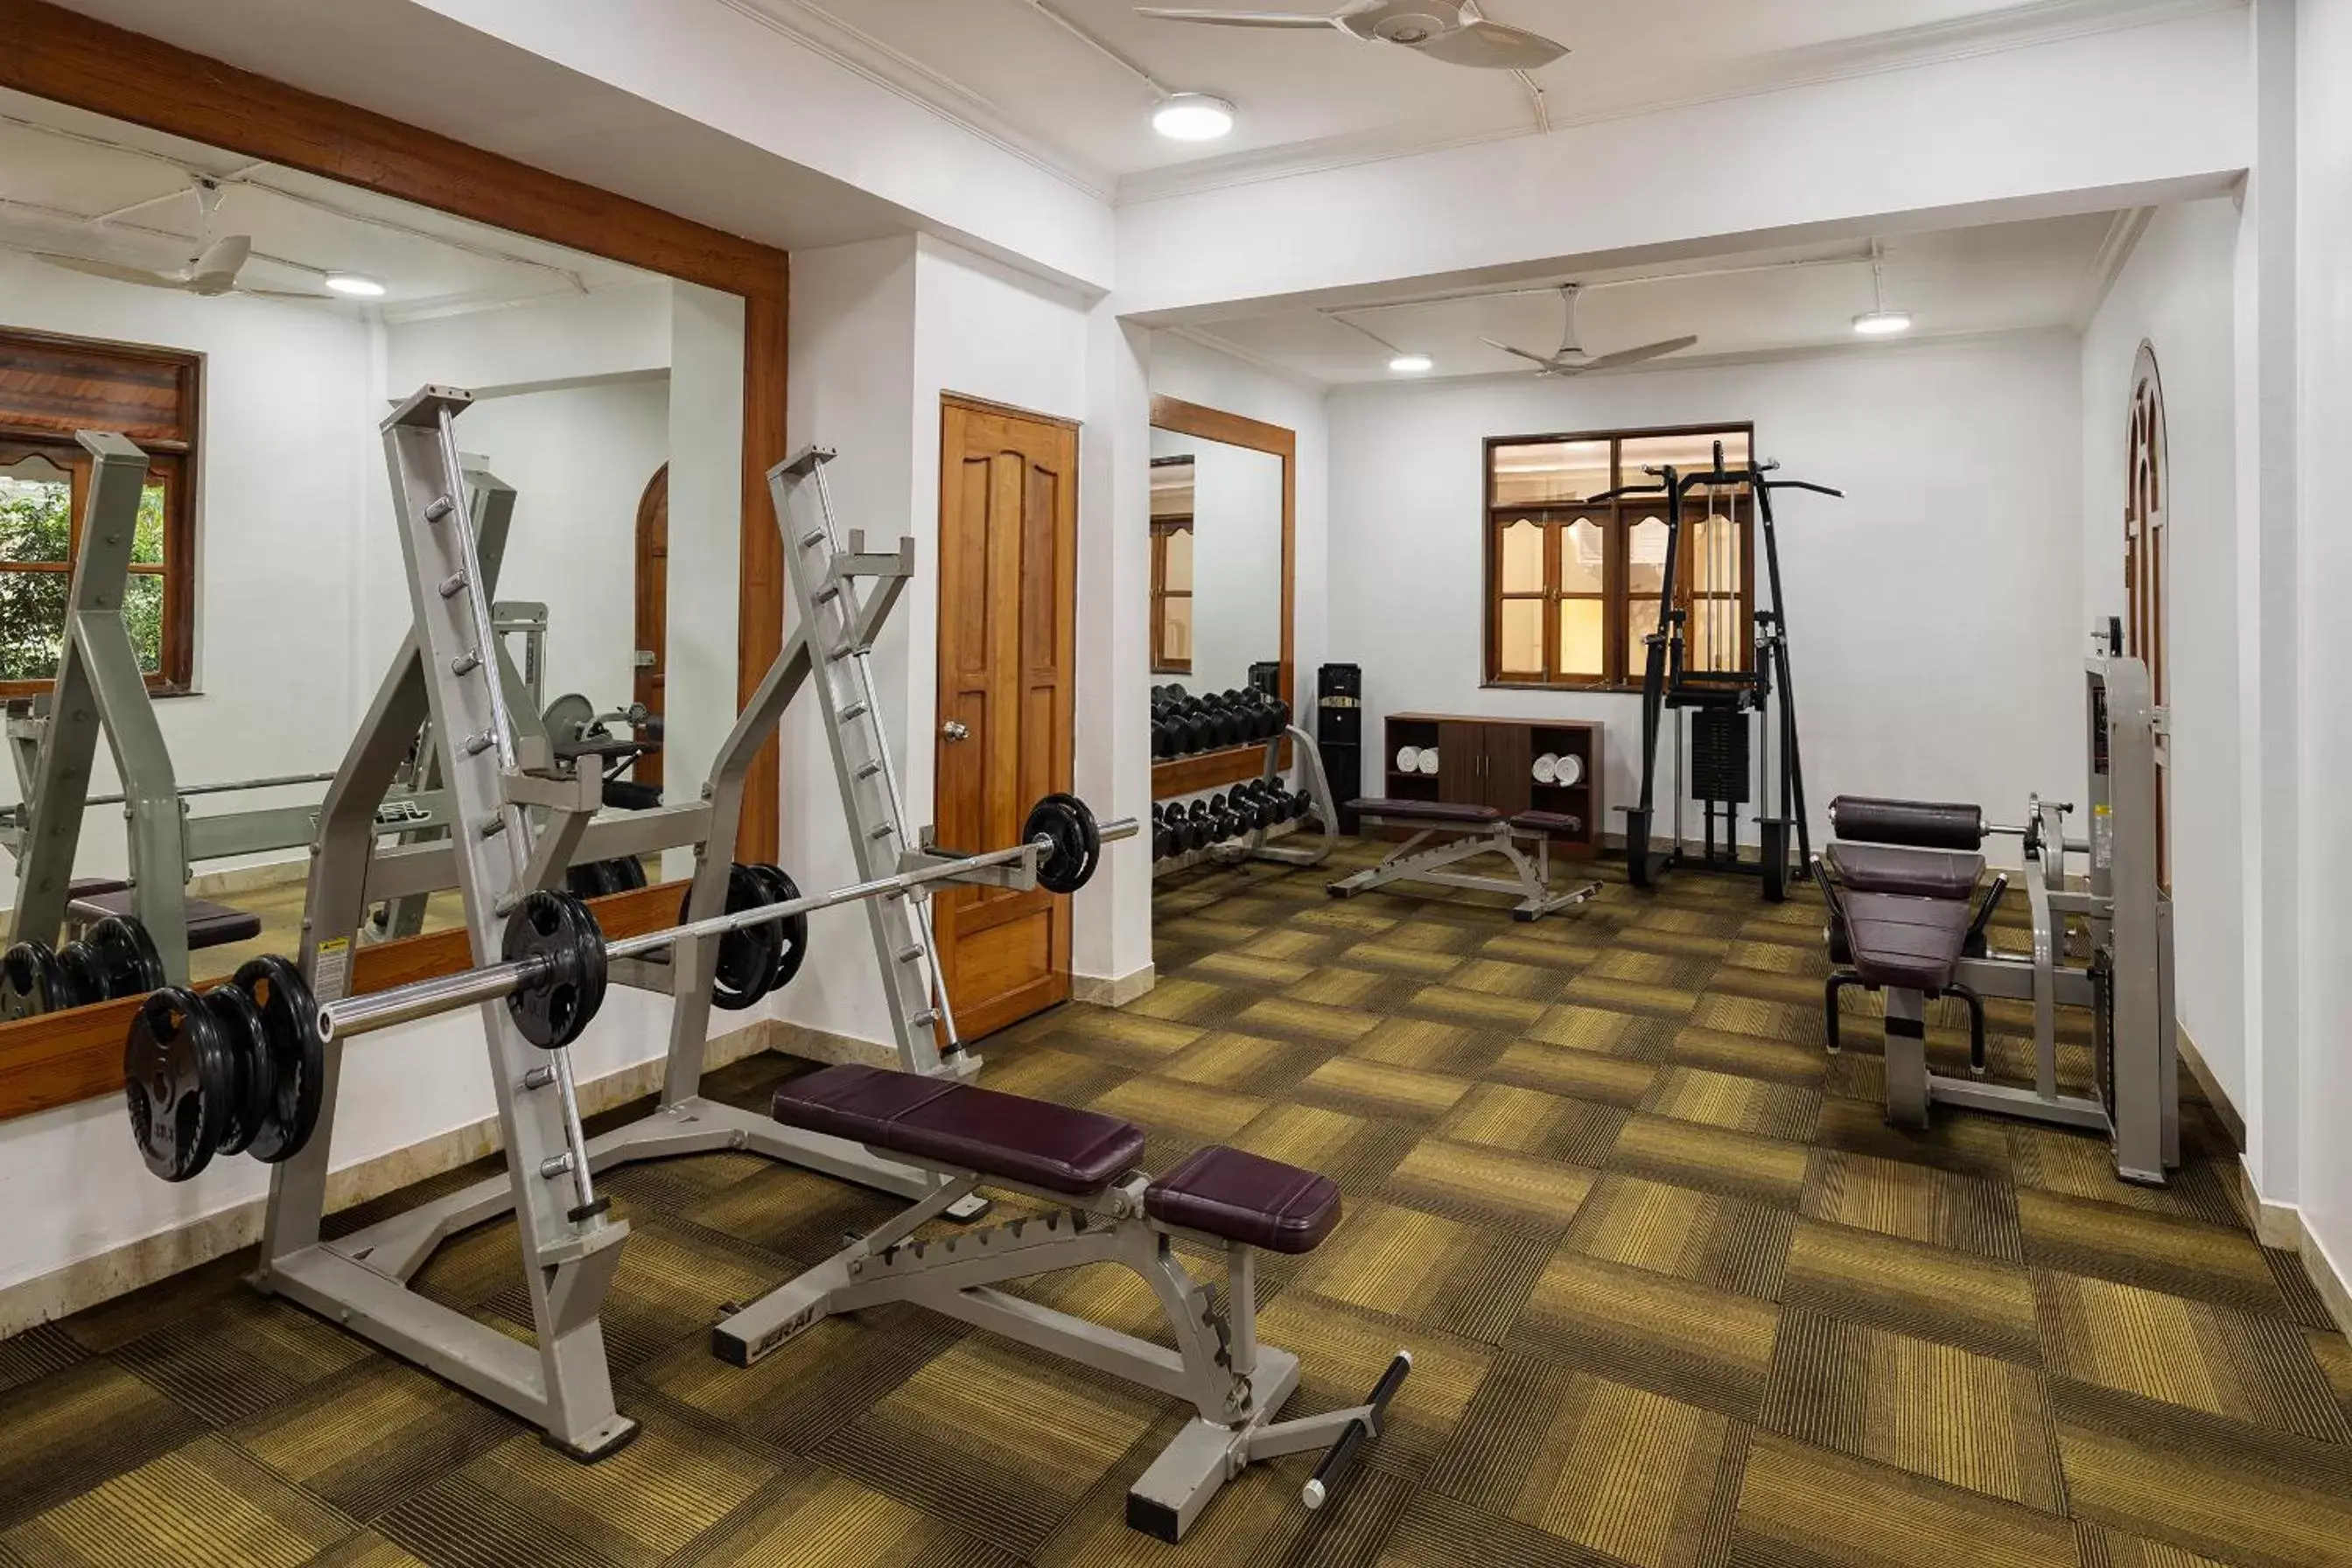 Fitness centre/facilities, Fitness Center/Facilities in Fortune Resort Benaulim, Goa - Member ITC's Hotel Group